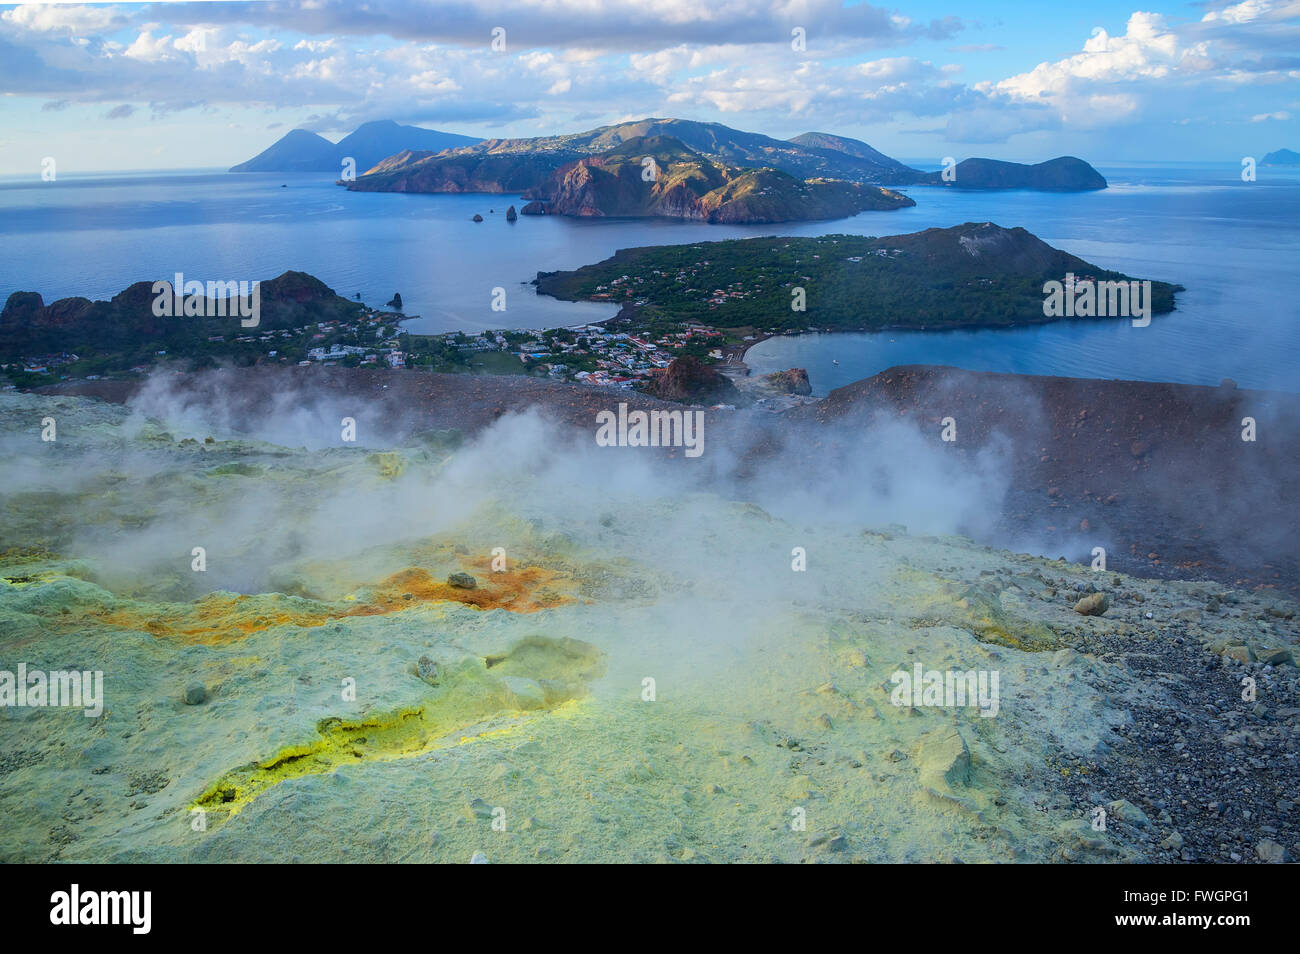 Gran Cratere (The Great Crater) and Aeolian Islands view, Vulcano Island, Aeolian Islands, UNESCO, north of Sicily, Italy Stock Photo